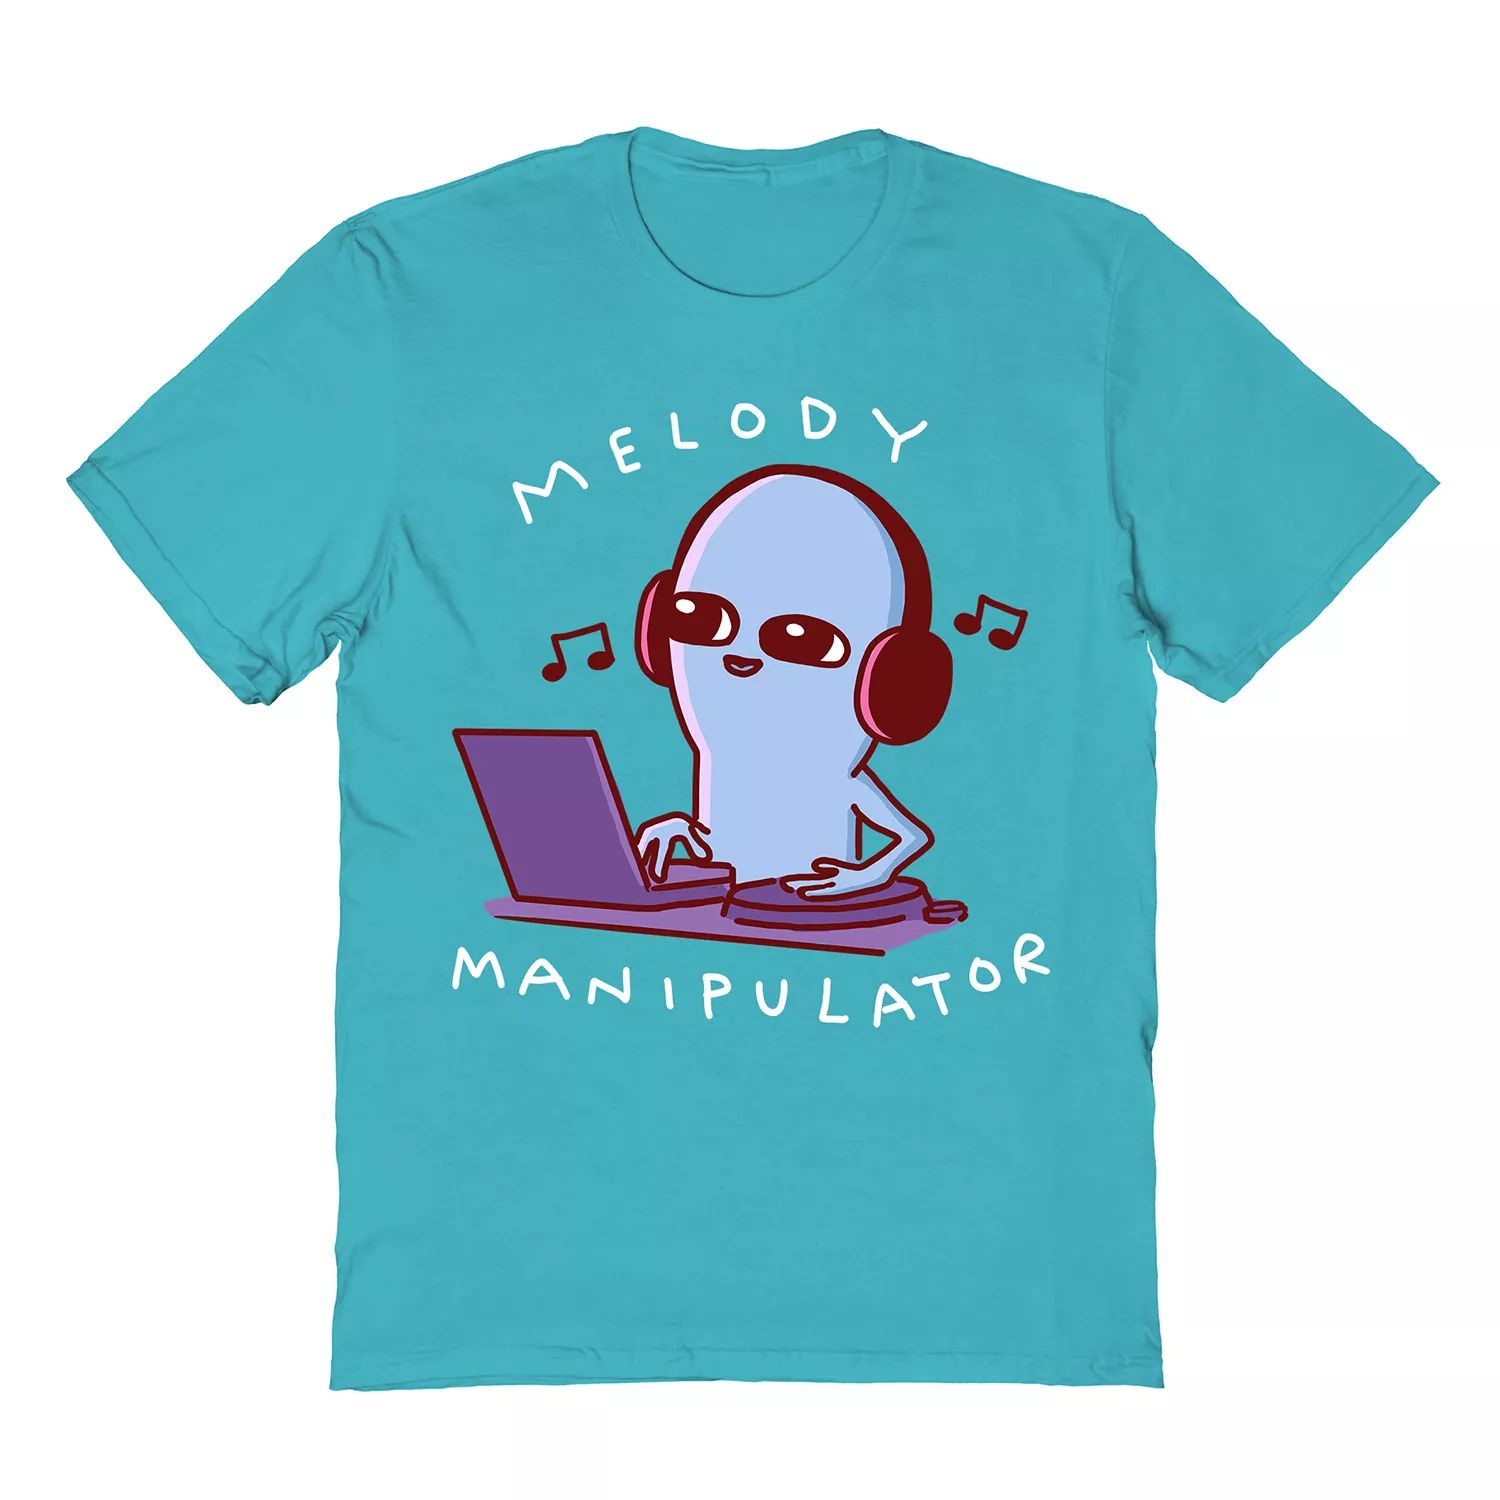 pyle nathan w strange planet the sneaking hiding vibrating creature Мужская футболка-манипулятор Melody Strange Planet от Nathan Pyle COLAB89 by Threadless